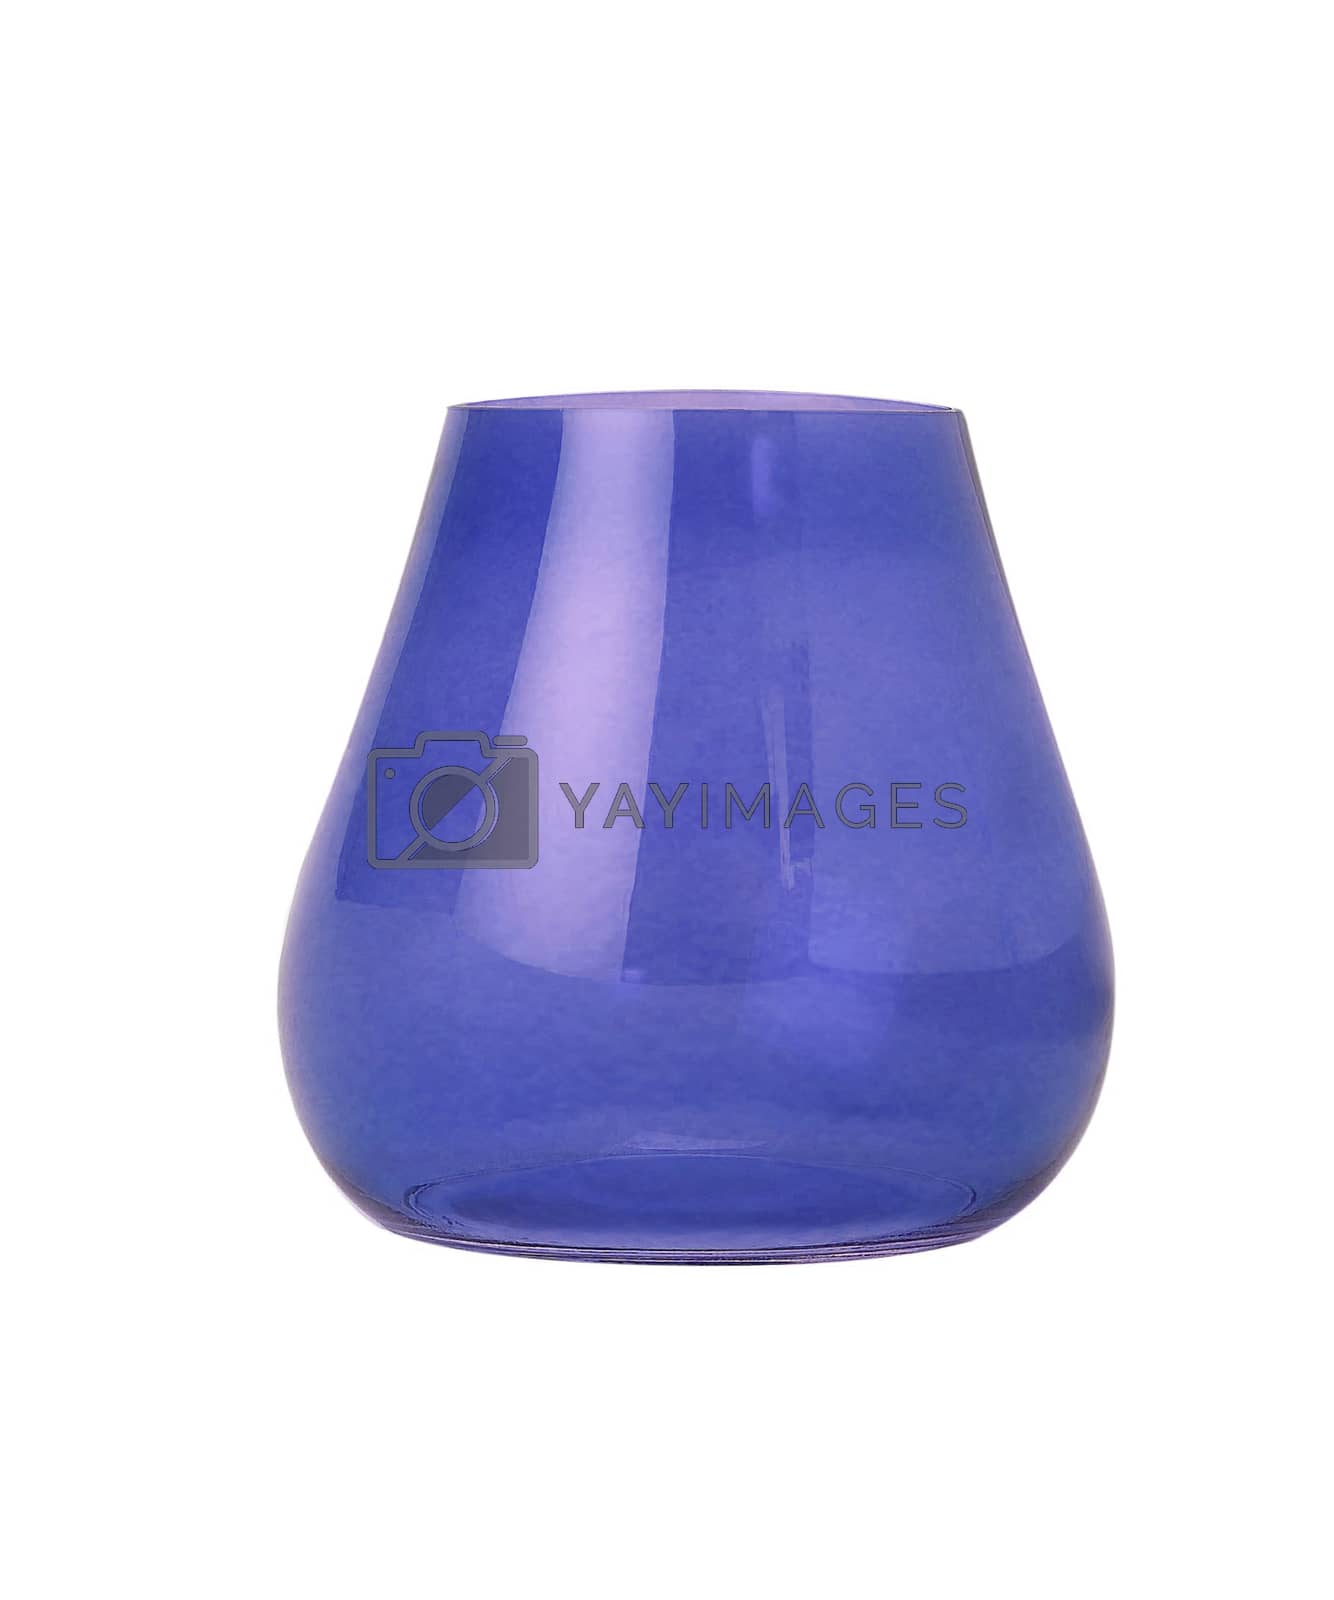 Royalty free image of Blue vase isolated on white background by ozaiachin